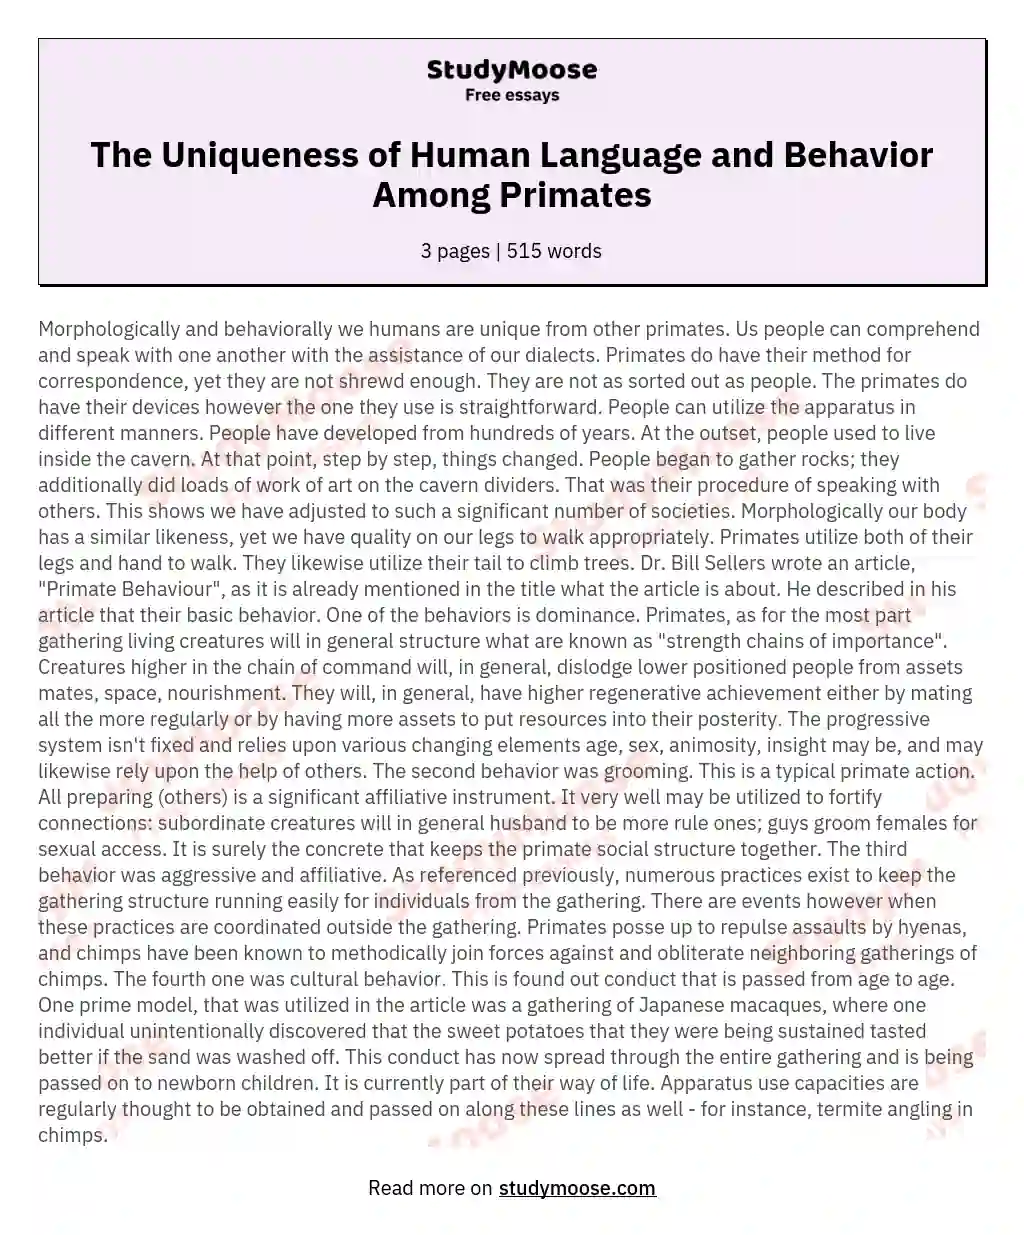 The Uniqueness of Human Language and Behavior Among Primates essay